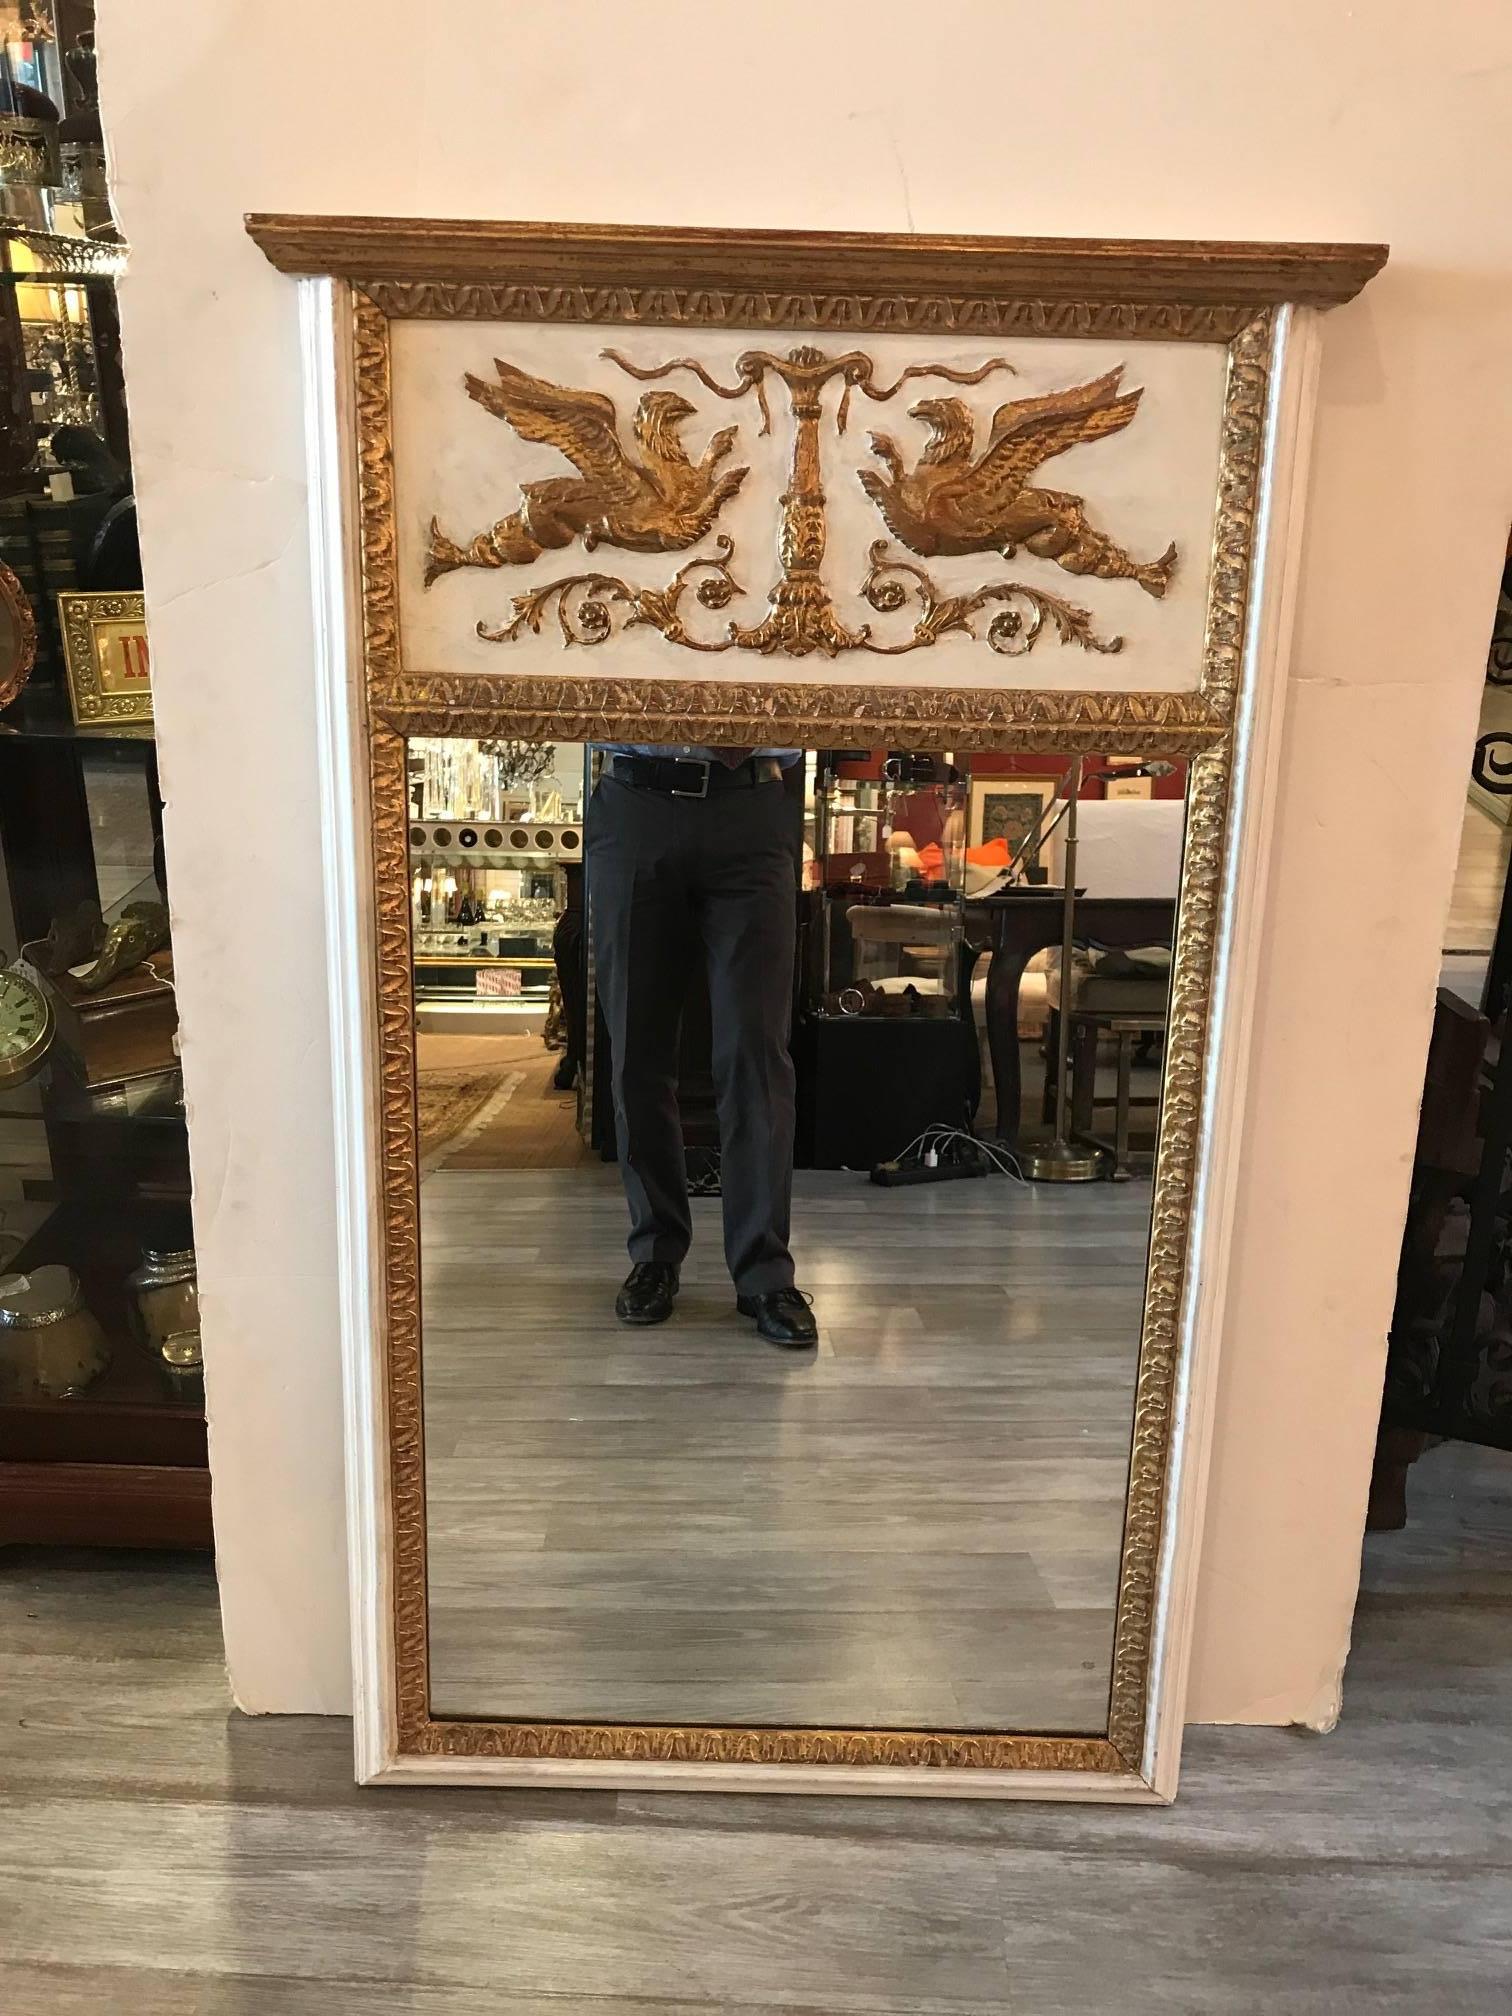 A light cream and giltwood Italian made mirror by Labarge. The upper portion with facing gilt griffins on a cream white background above a mirror with gilt border, marked Made in Italy with an early Labarge label.